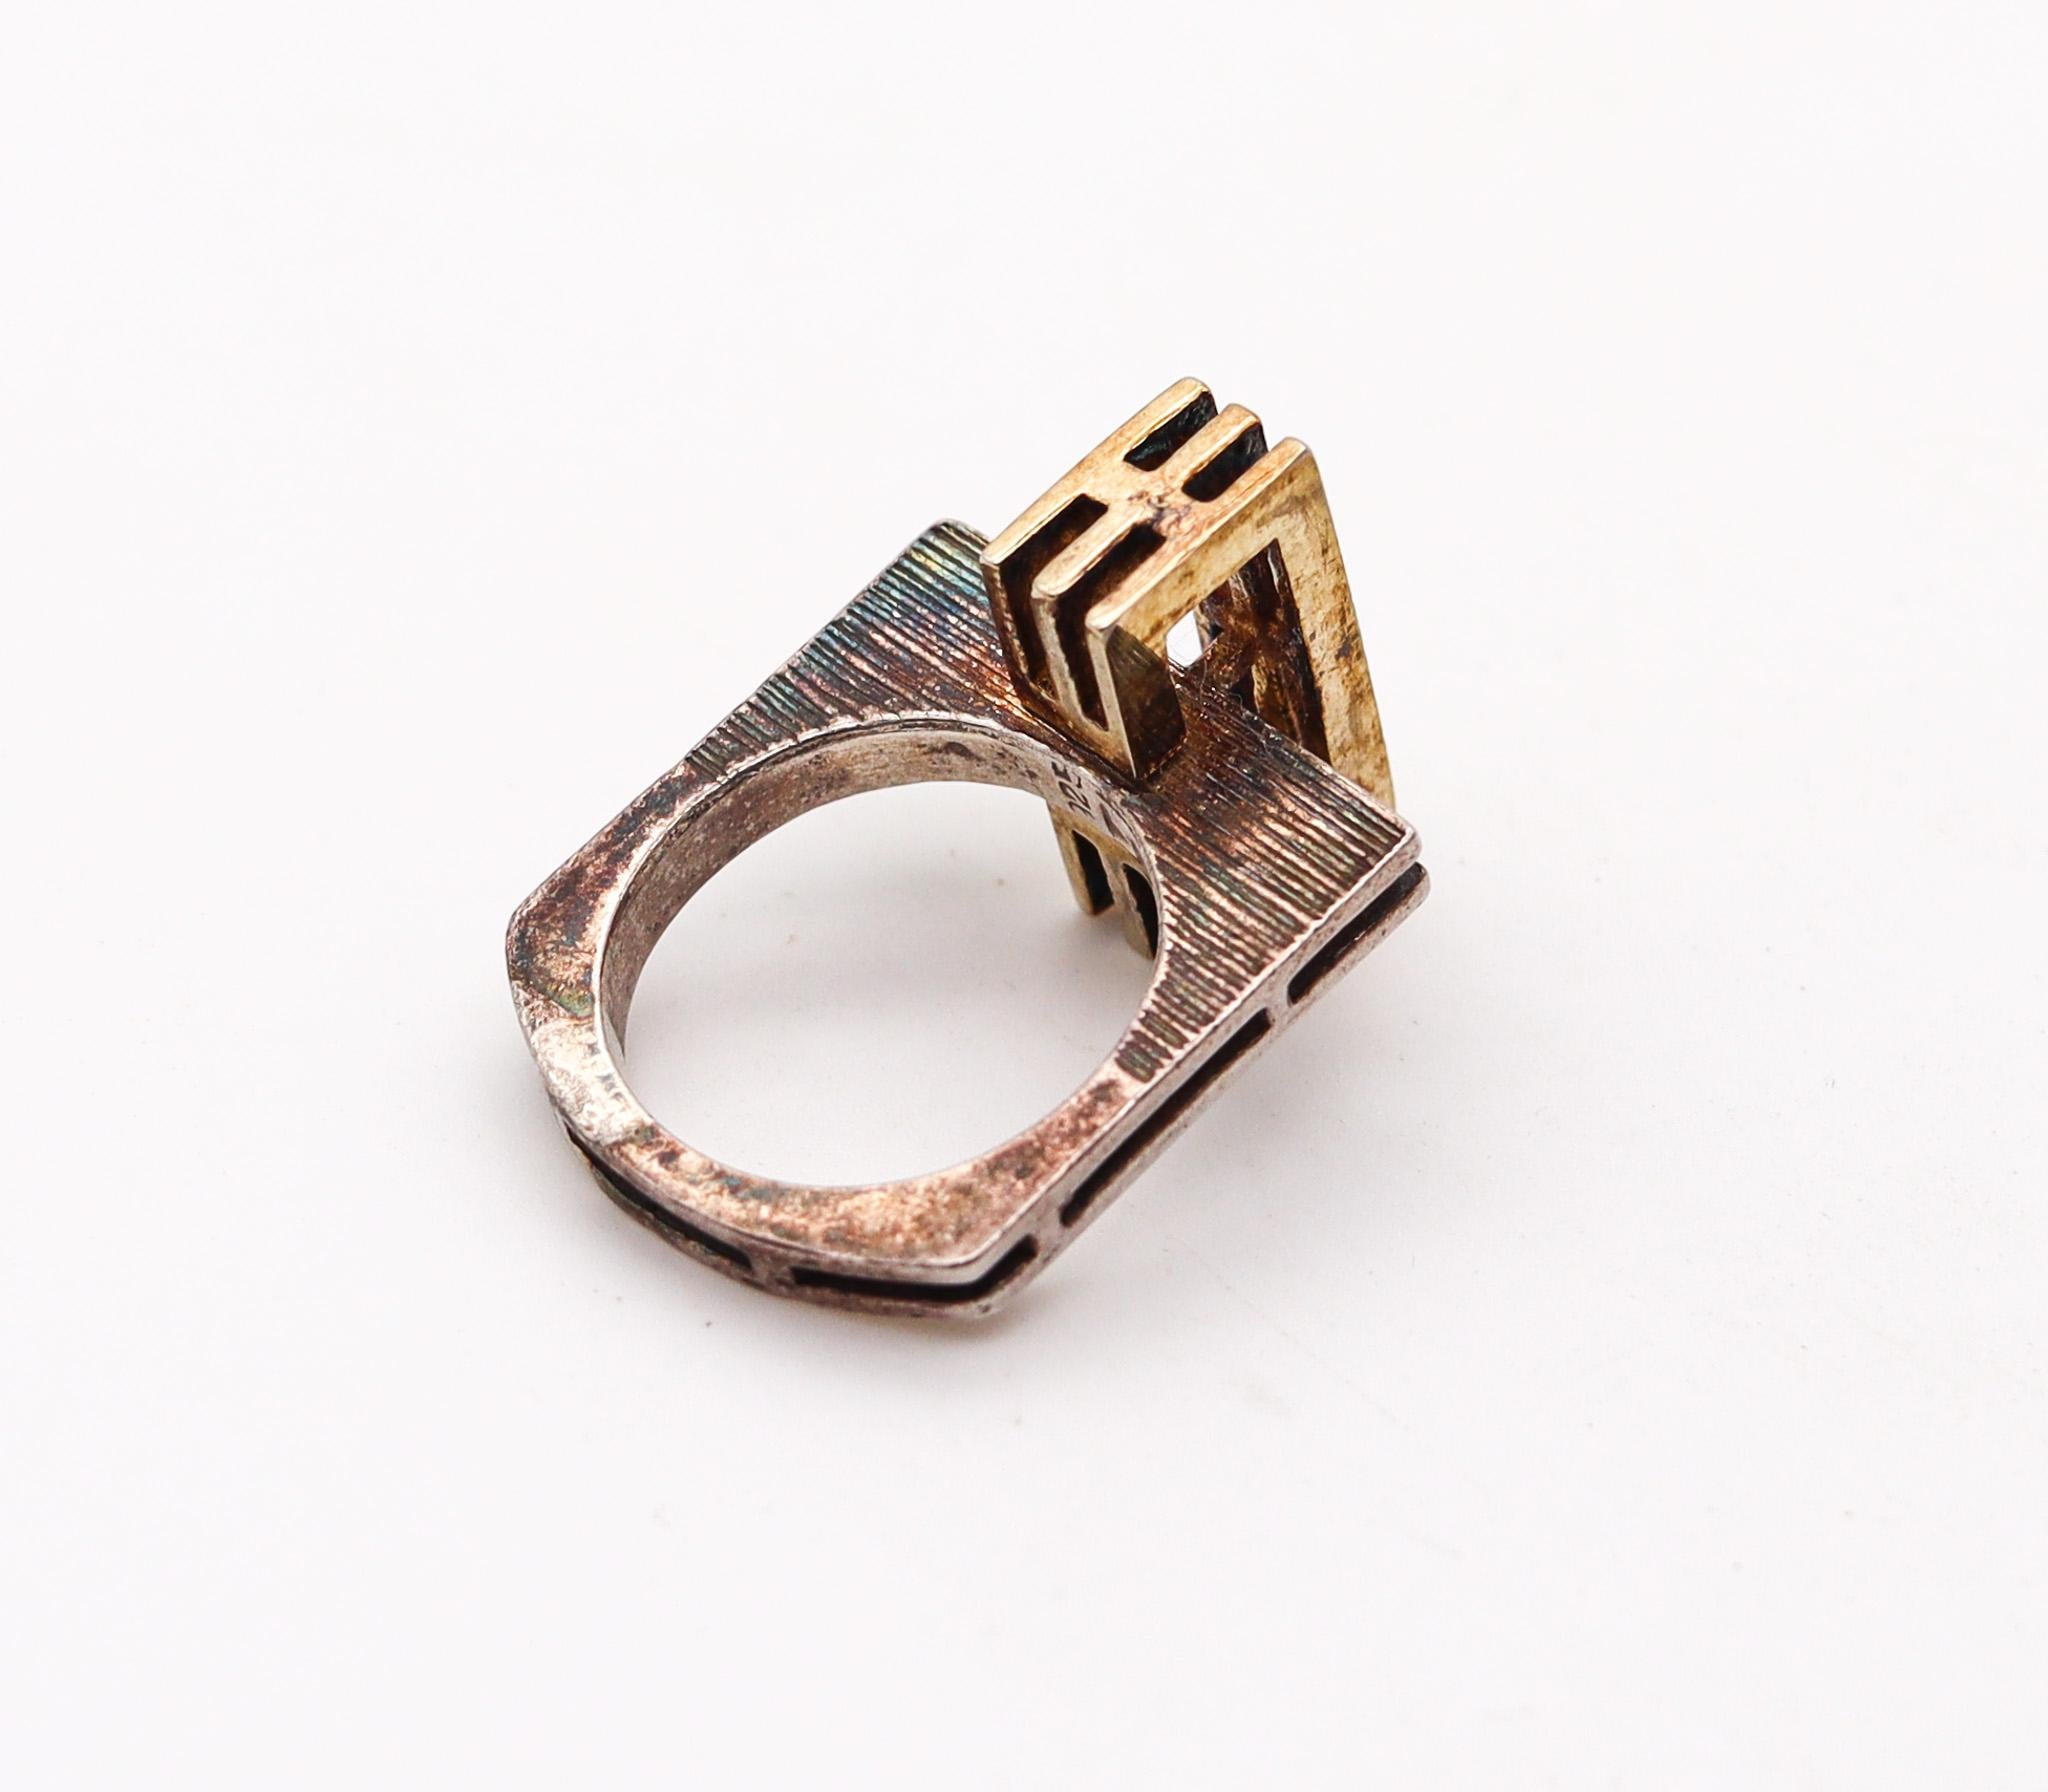 Danish Modernism 1970 Geometric Sculptural Ring in Sterling & Textured 14Kt Gold In Excellent Condition For Sale In Miami, FL